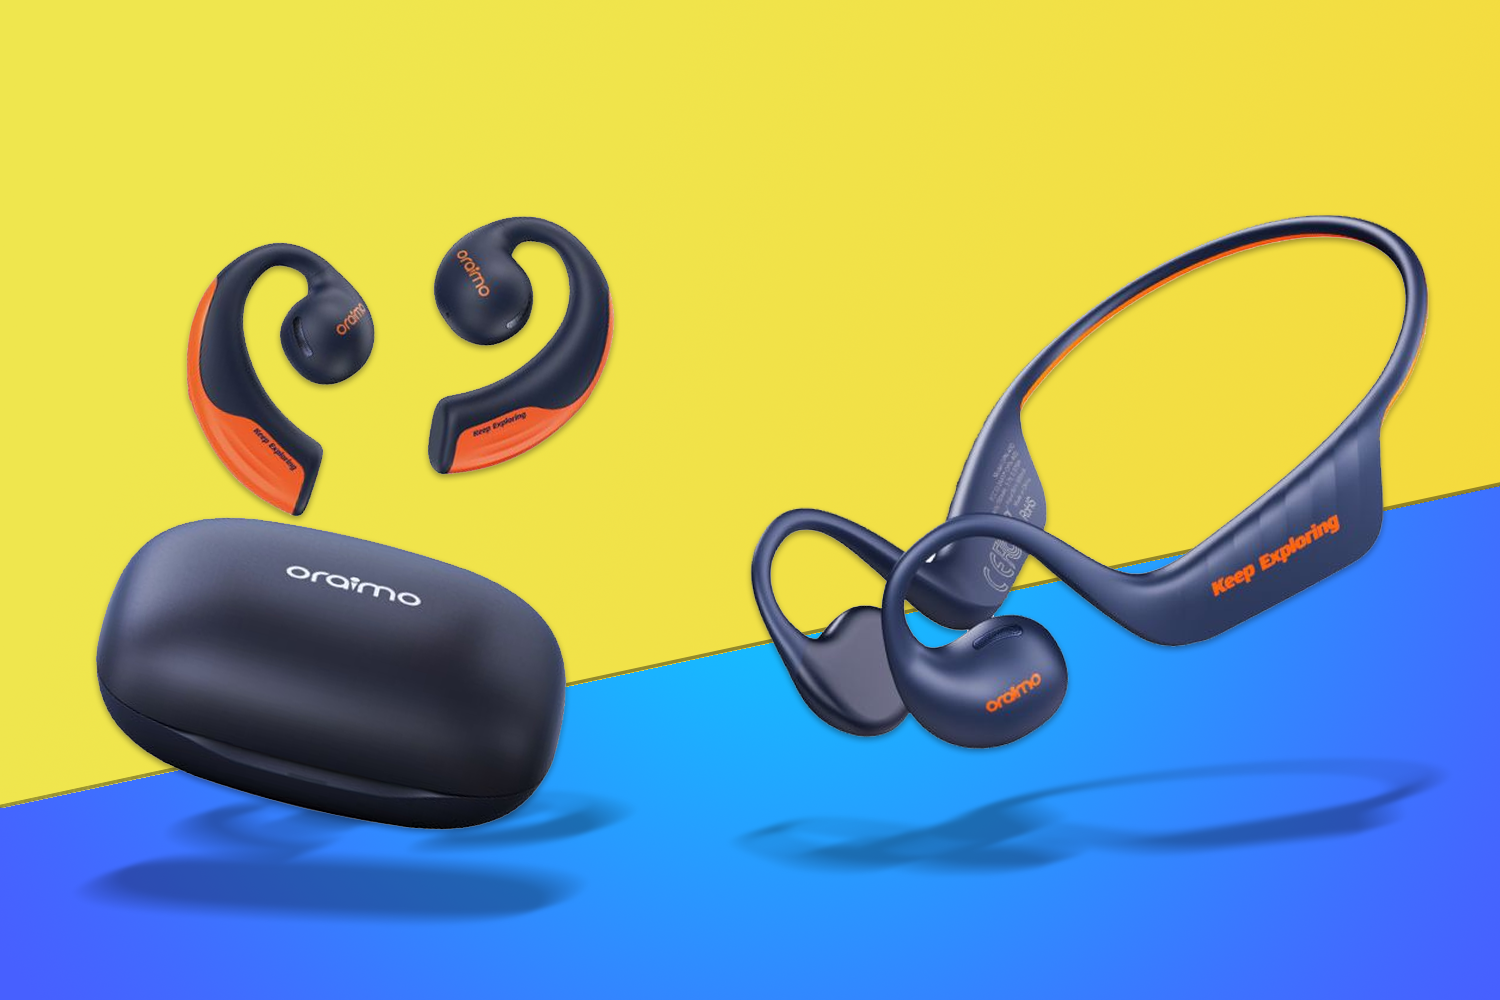 Oraimo's clever open-ear headphones let you enjoy your music while